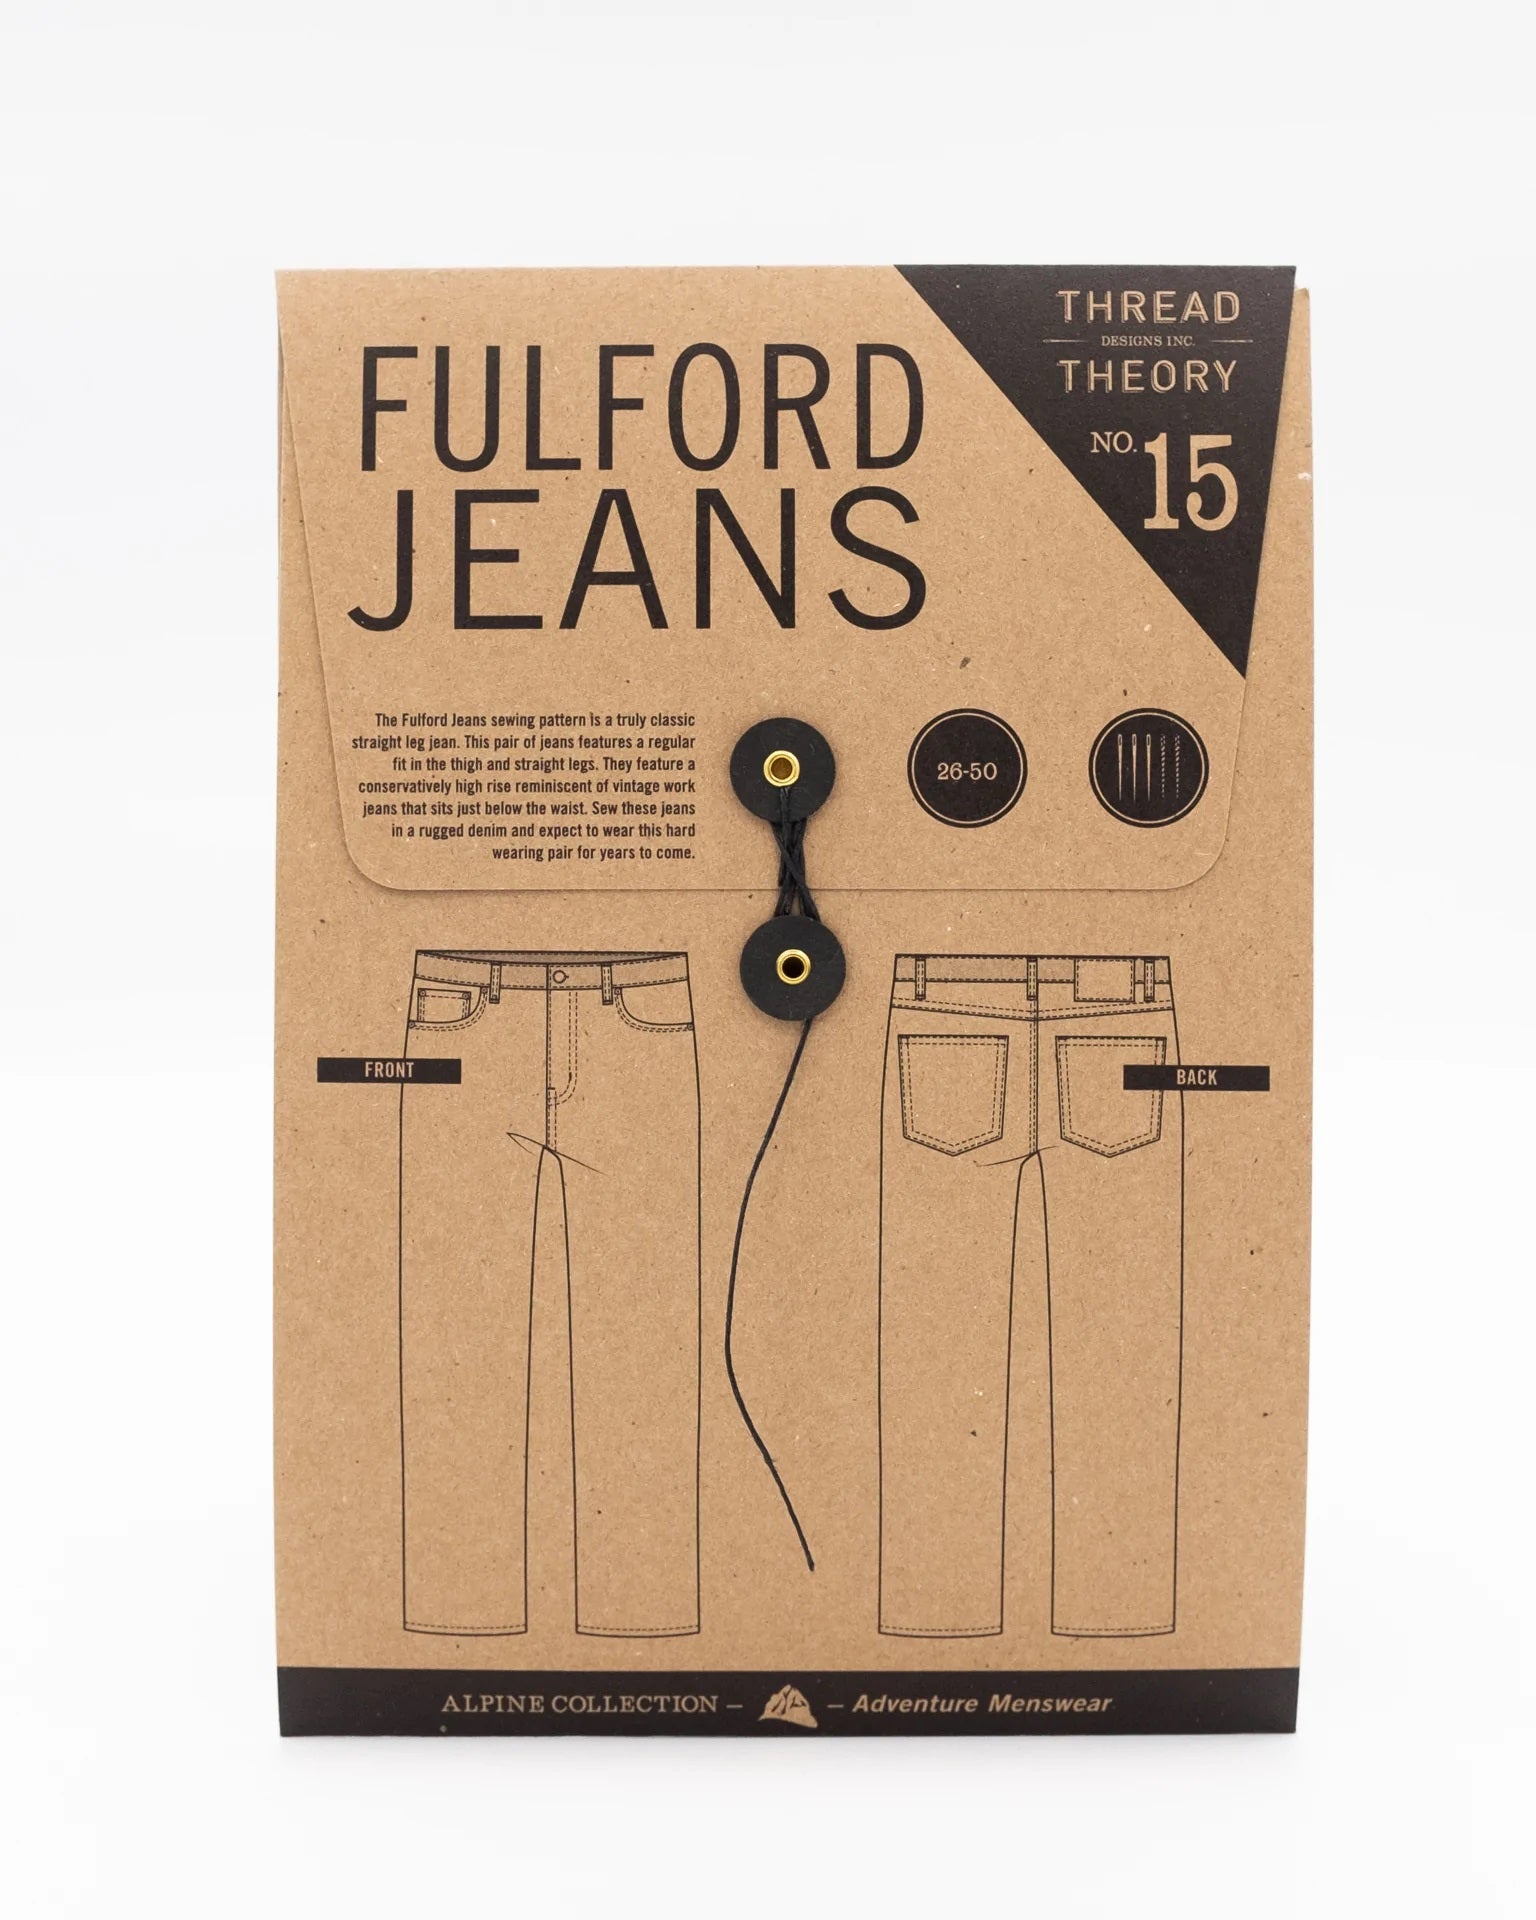 Fulford Jeans pattern by Thread Theory